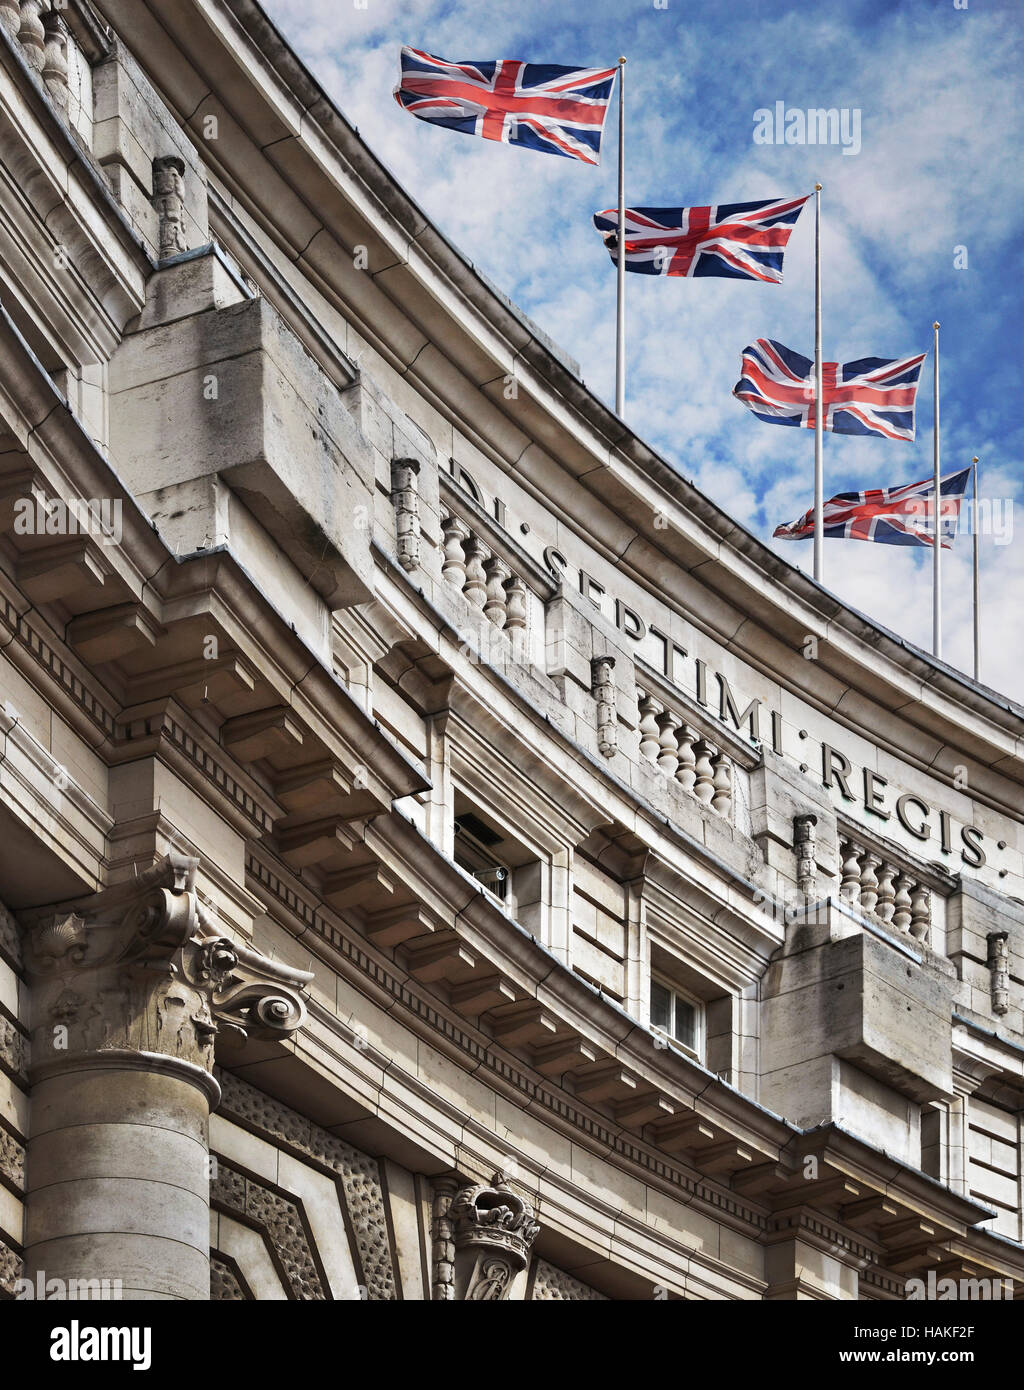 Top of the Admiralty Arch building with British Flags, London, England Stock Photo